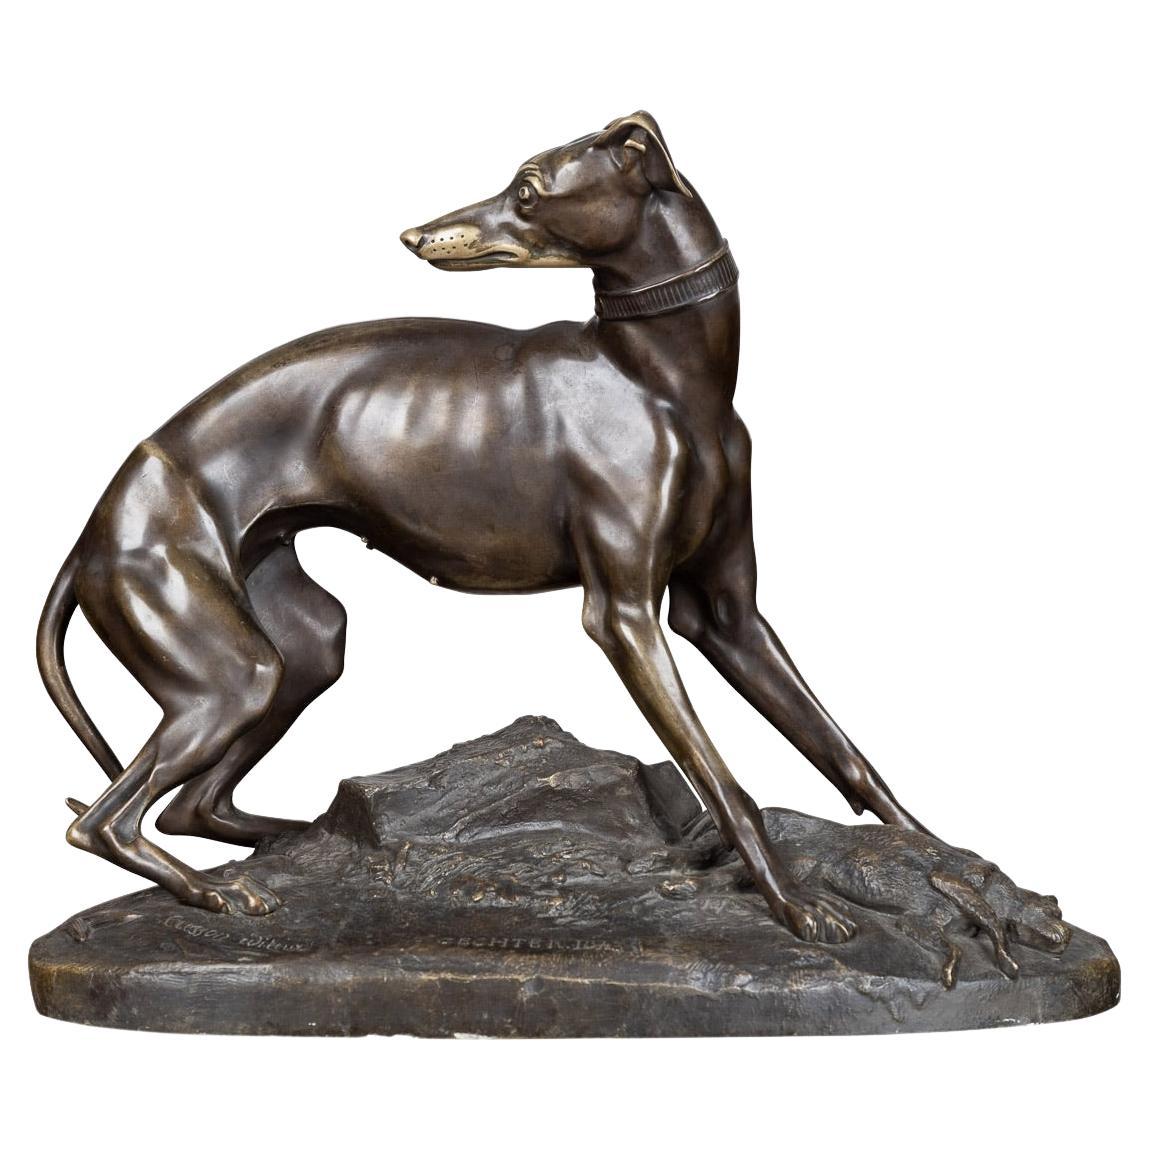 19th Century French Whippet Bronze, Jean-Francois-Theodore Gechter, c.1796-1844